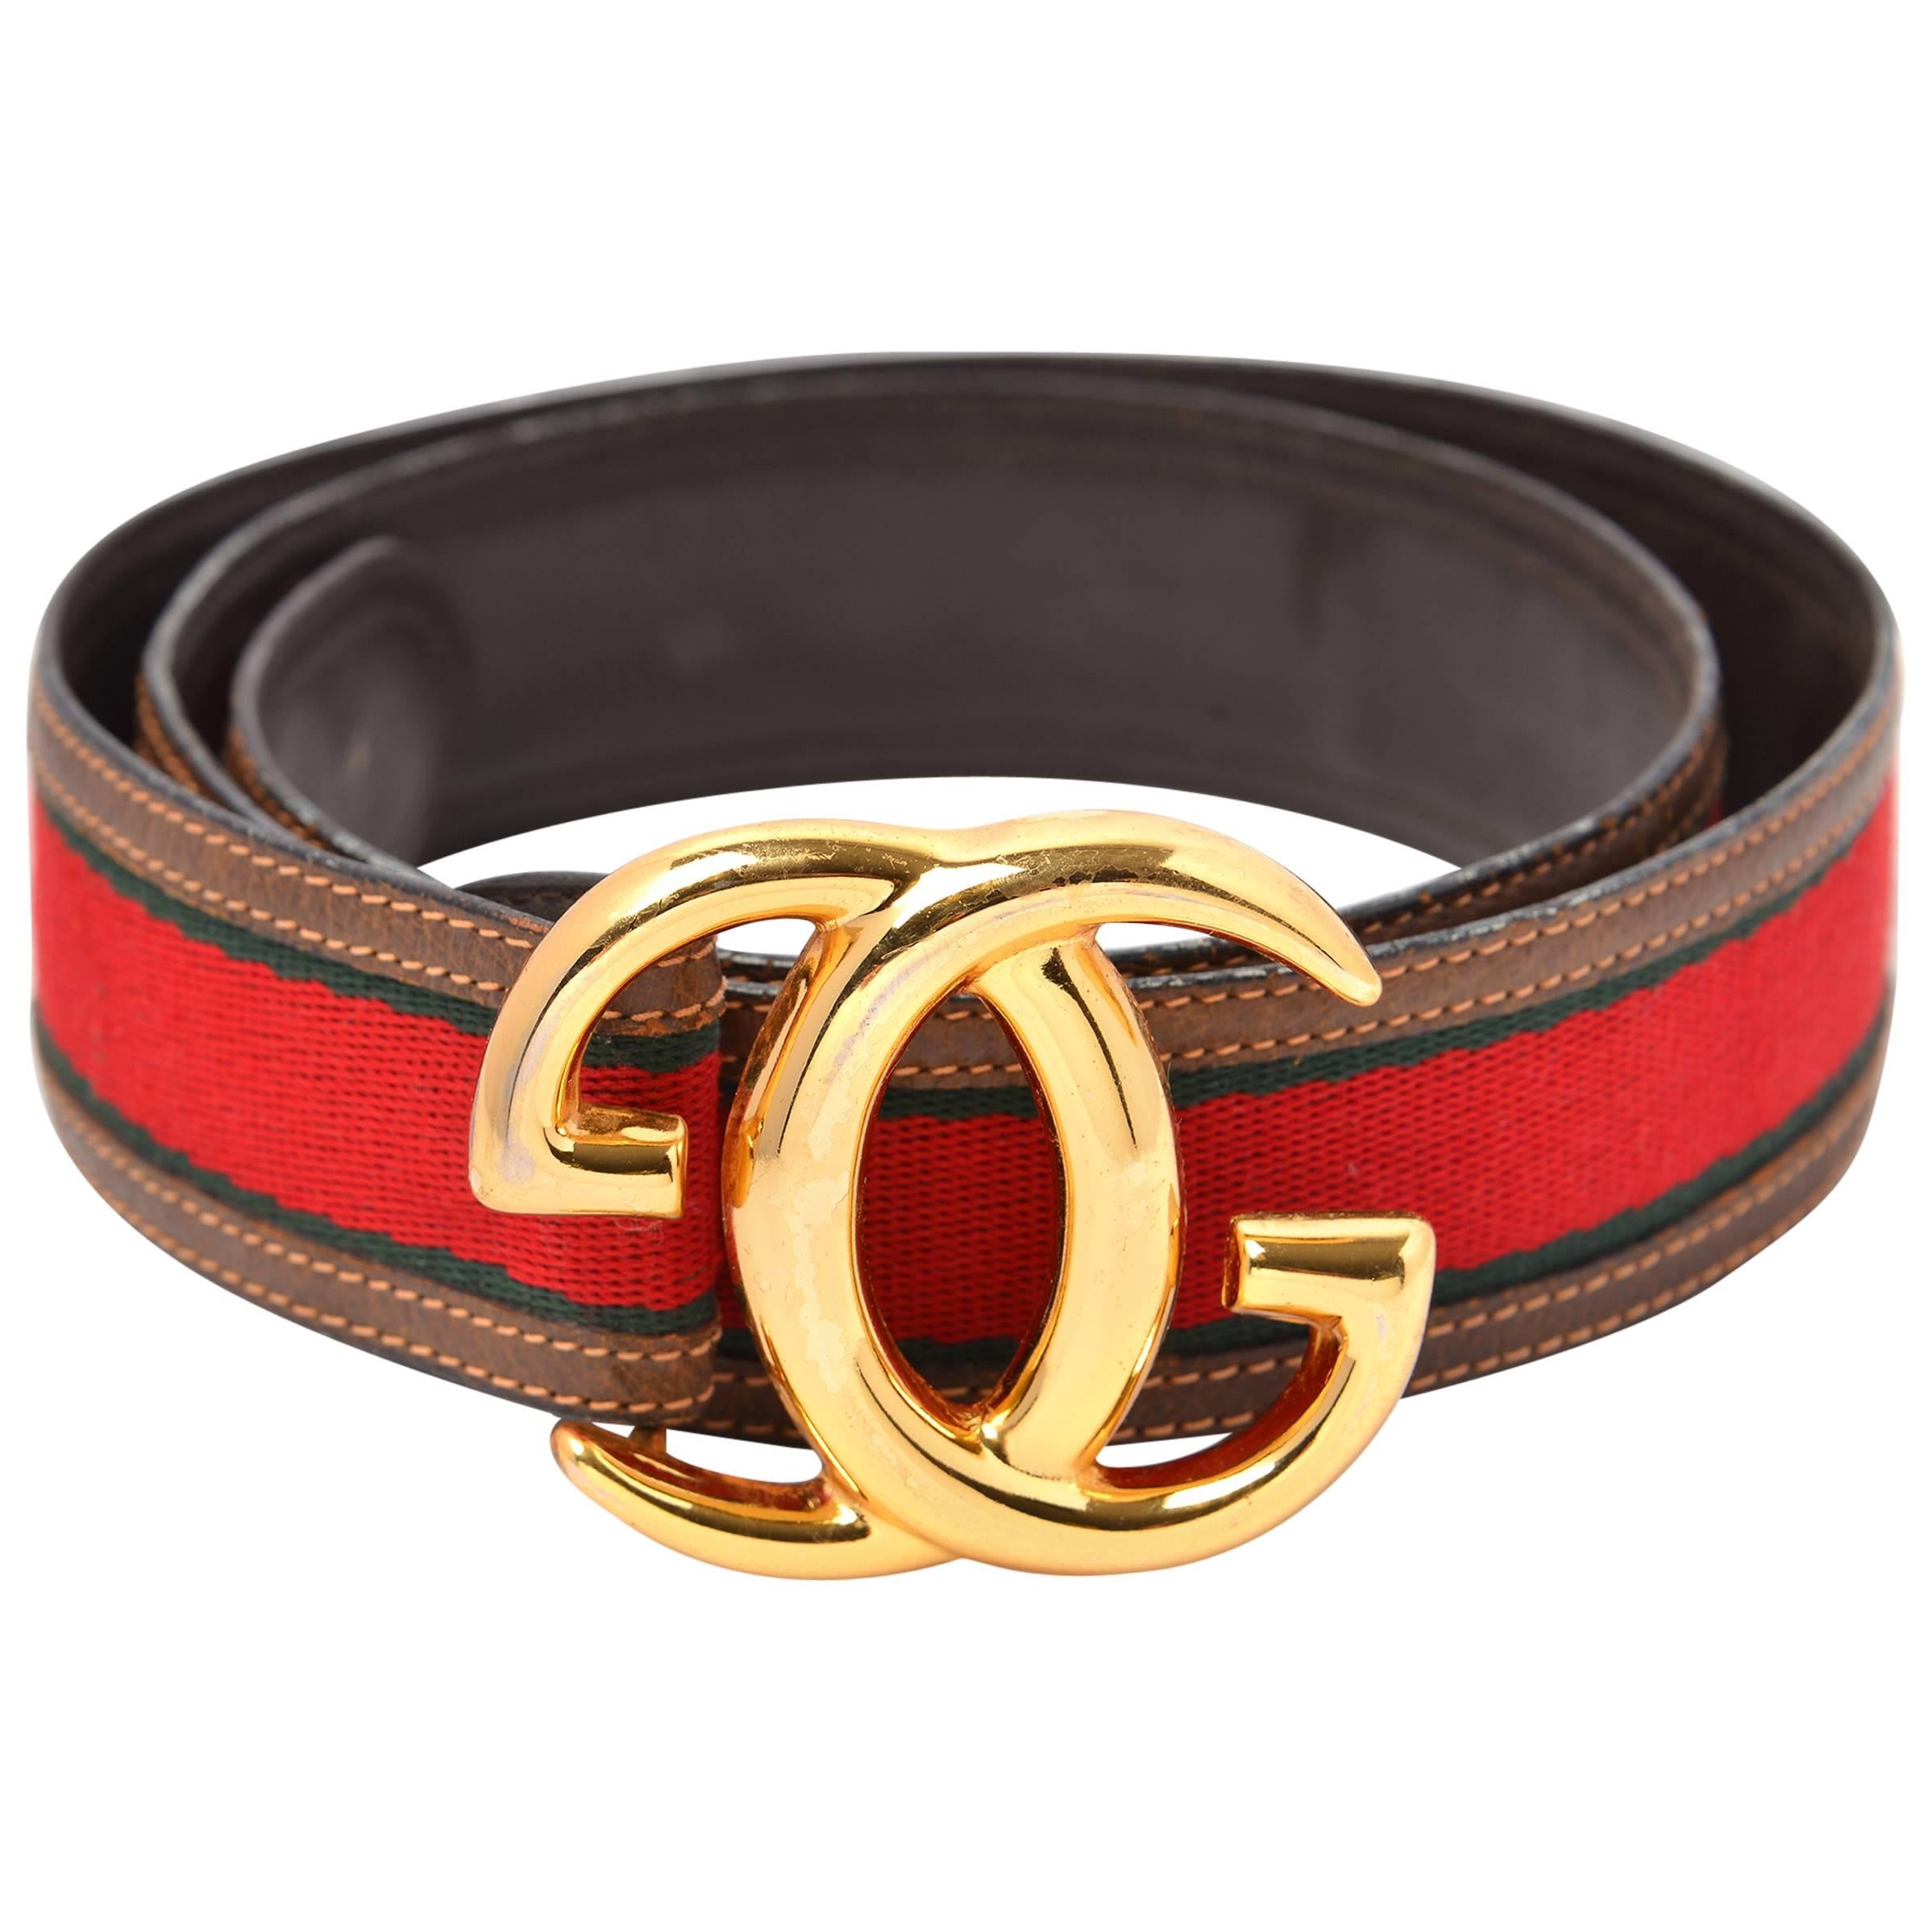 Vintage Gucci Leather and Canvas Belt with Gold-Tone Double G's